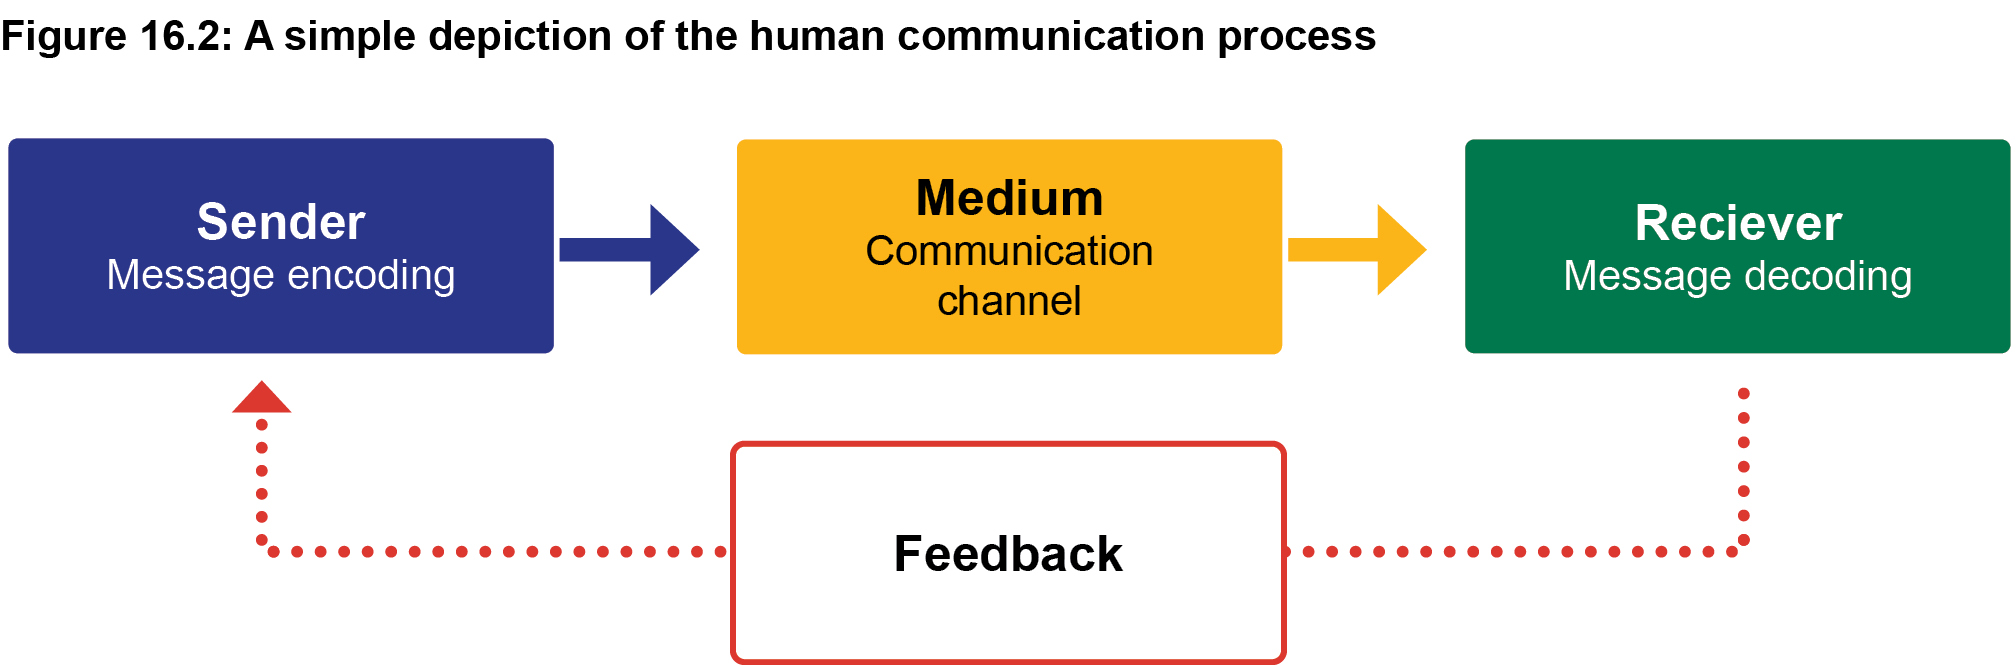 A simple depiction of the human communication process